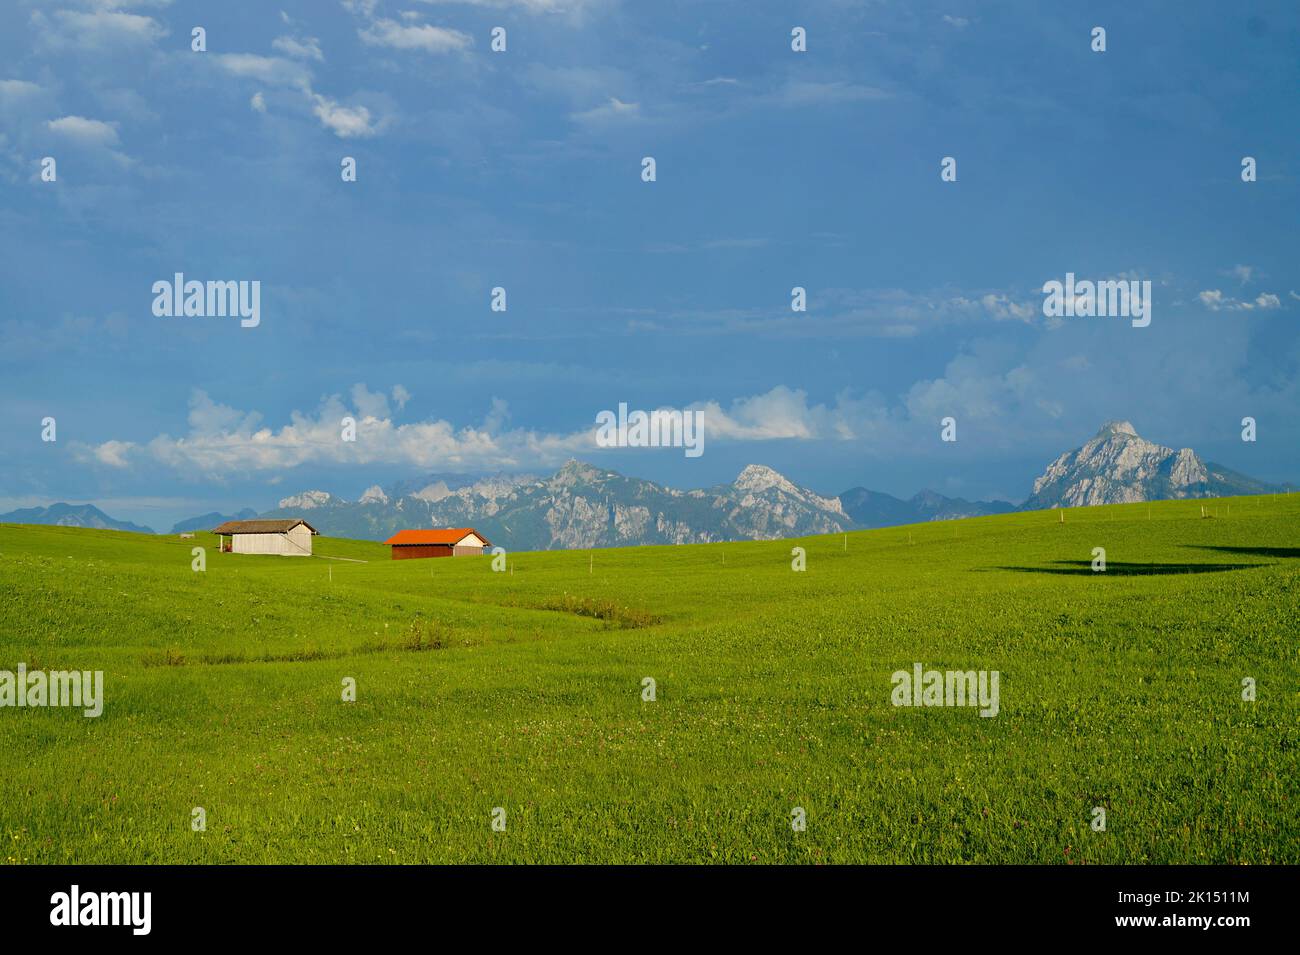 scenic, sunlit, lush green alpine meadows of the Allgaeu region in Bavaria with the Alps in the background Stock Photo